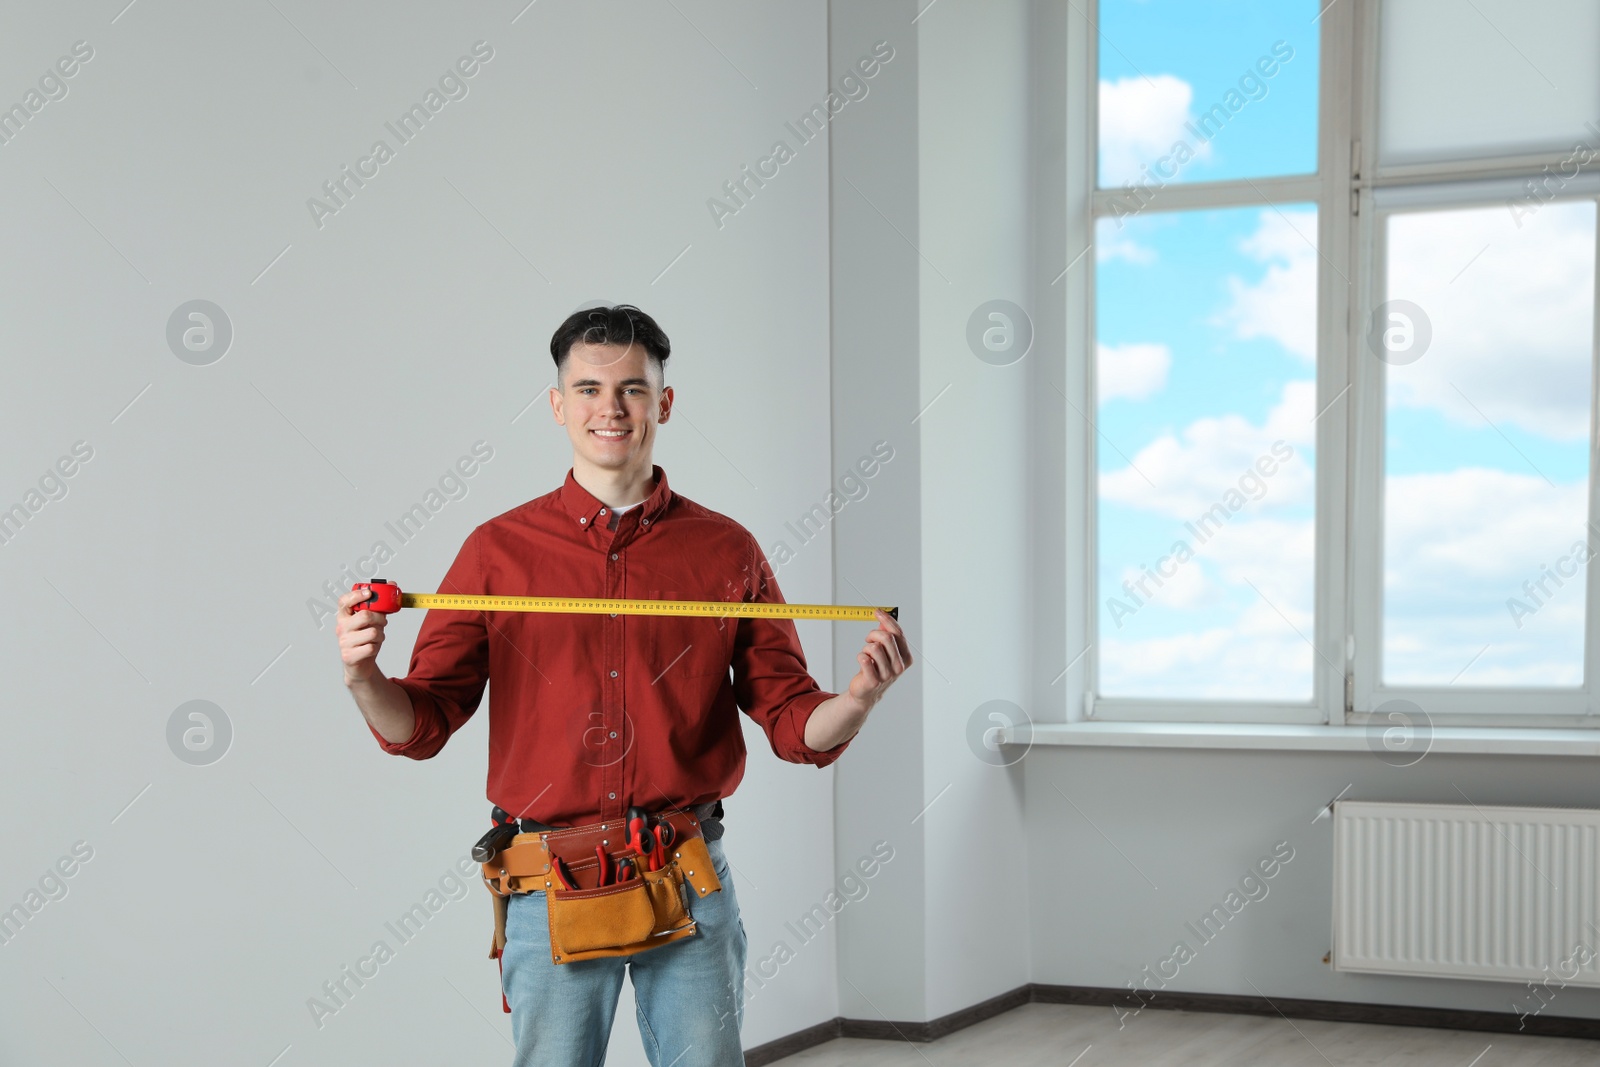 Photo of Handyman with tool belt and measuring tape in empty room